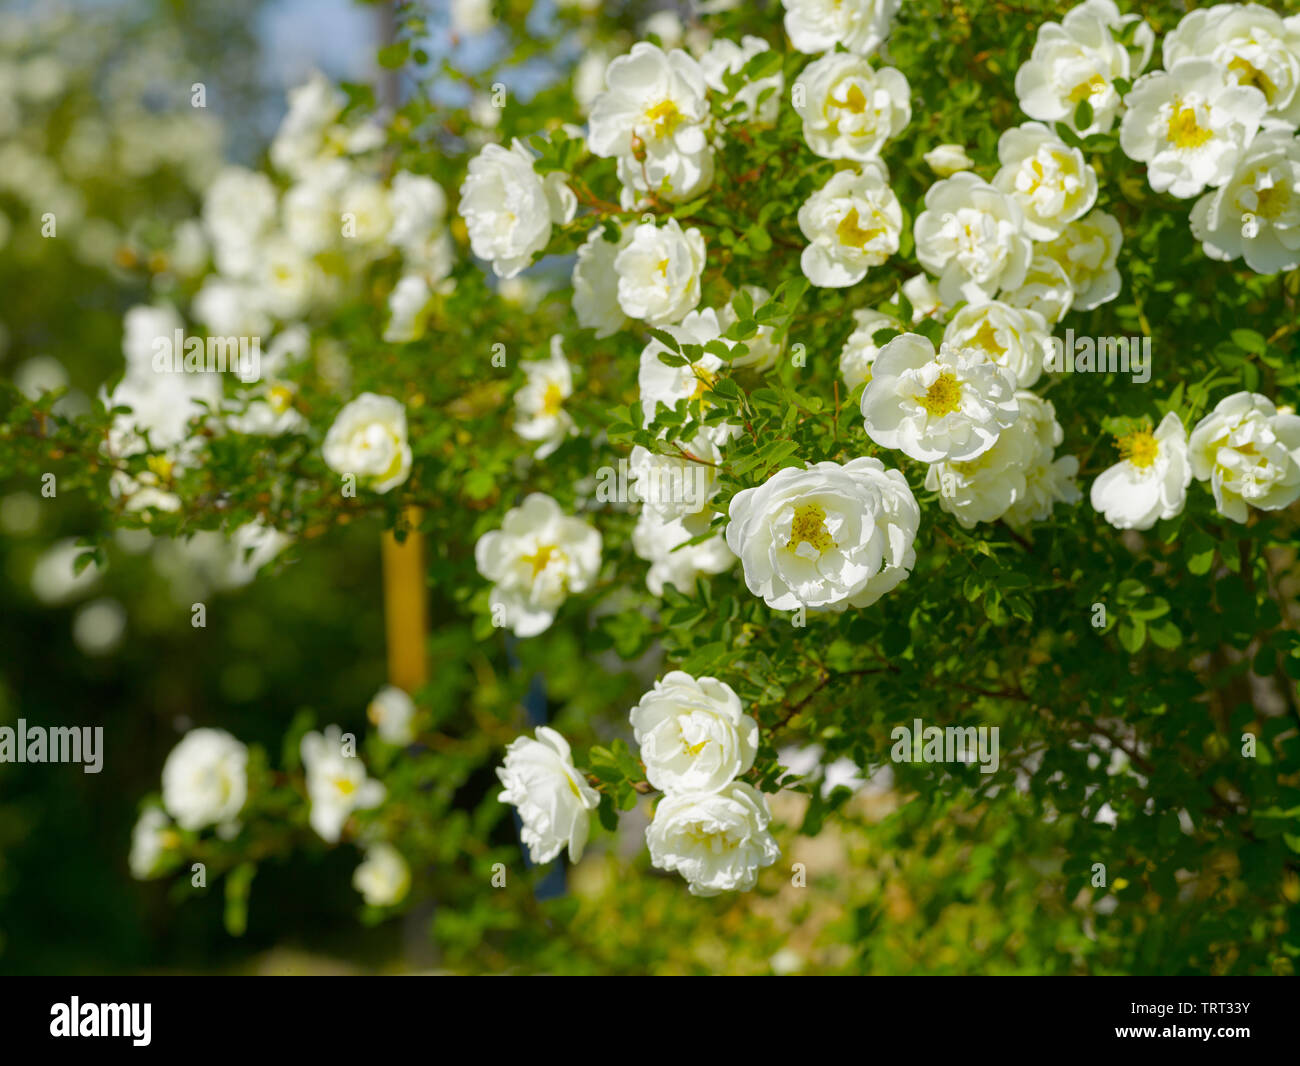 Rose Hip Bush High Resolution Stock Photography And Images Alamy